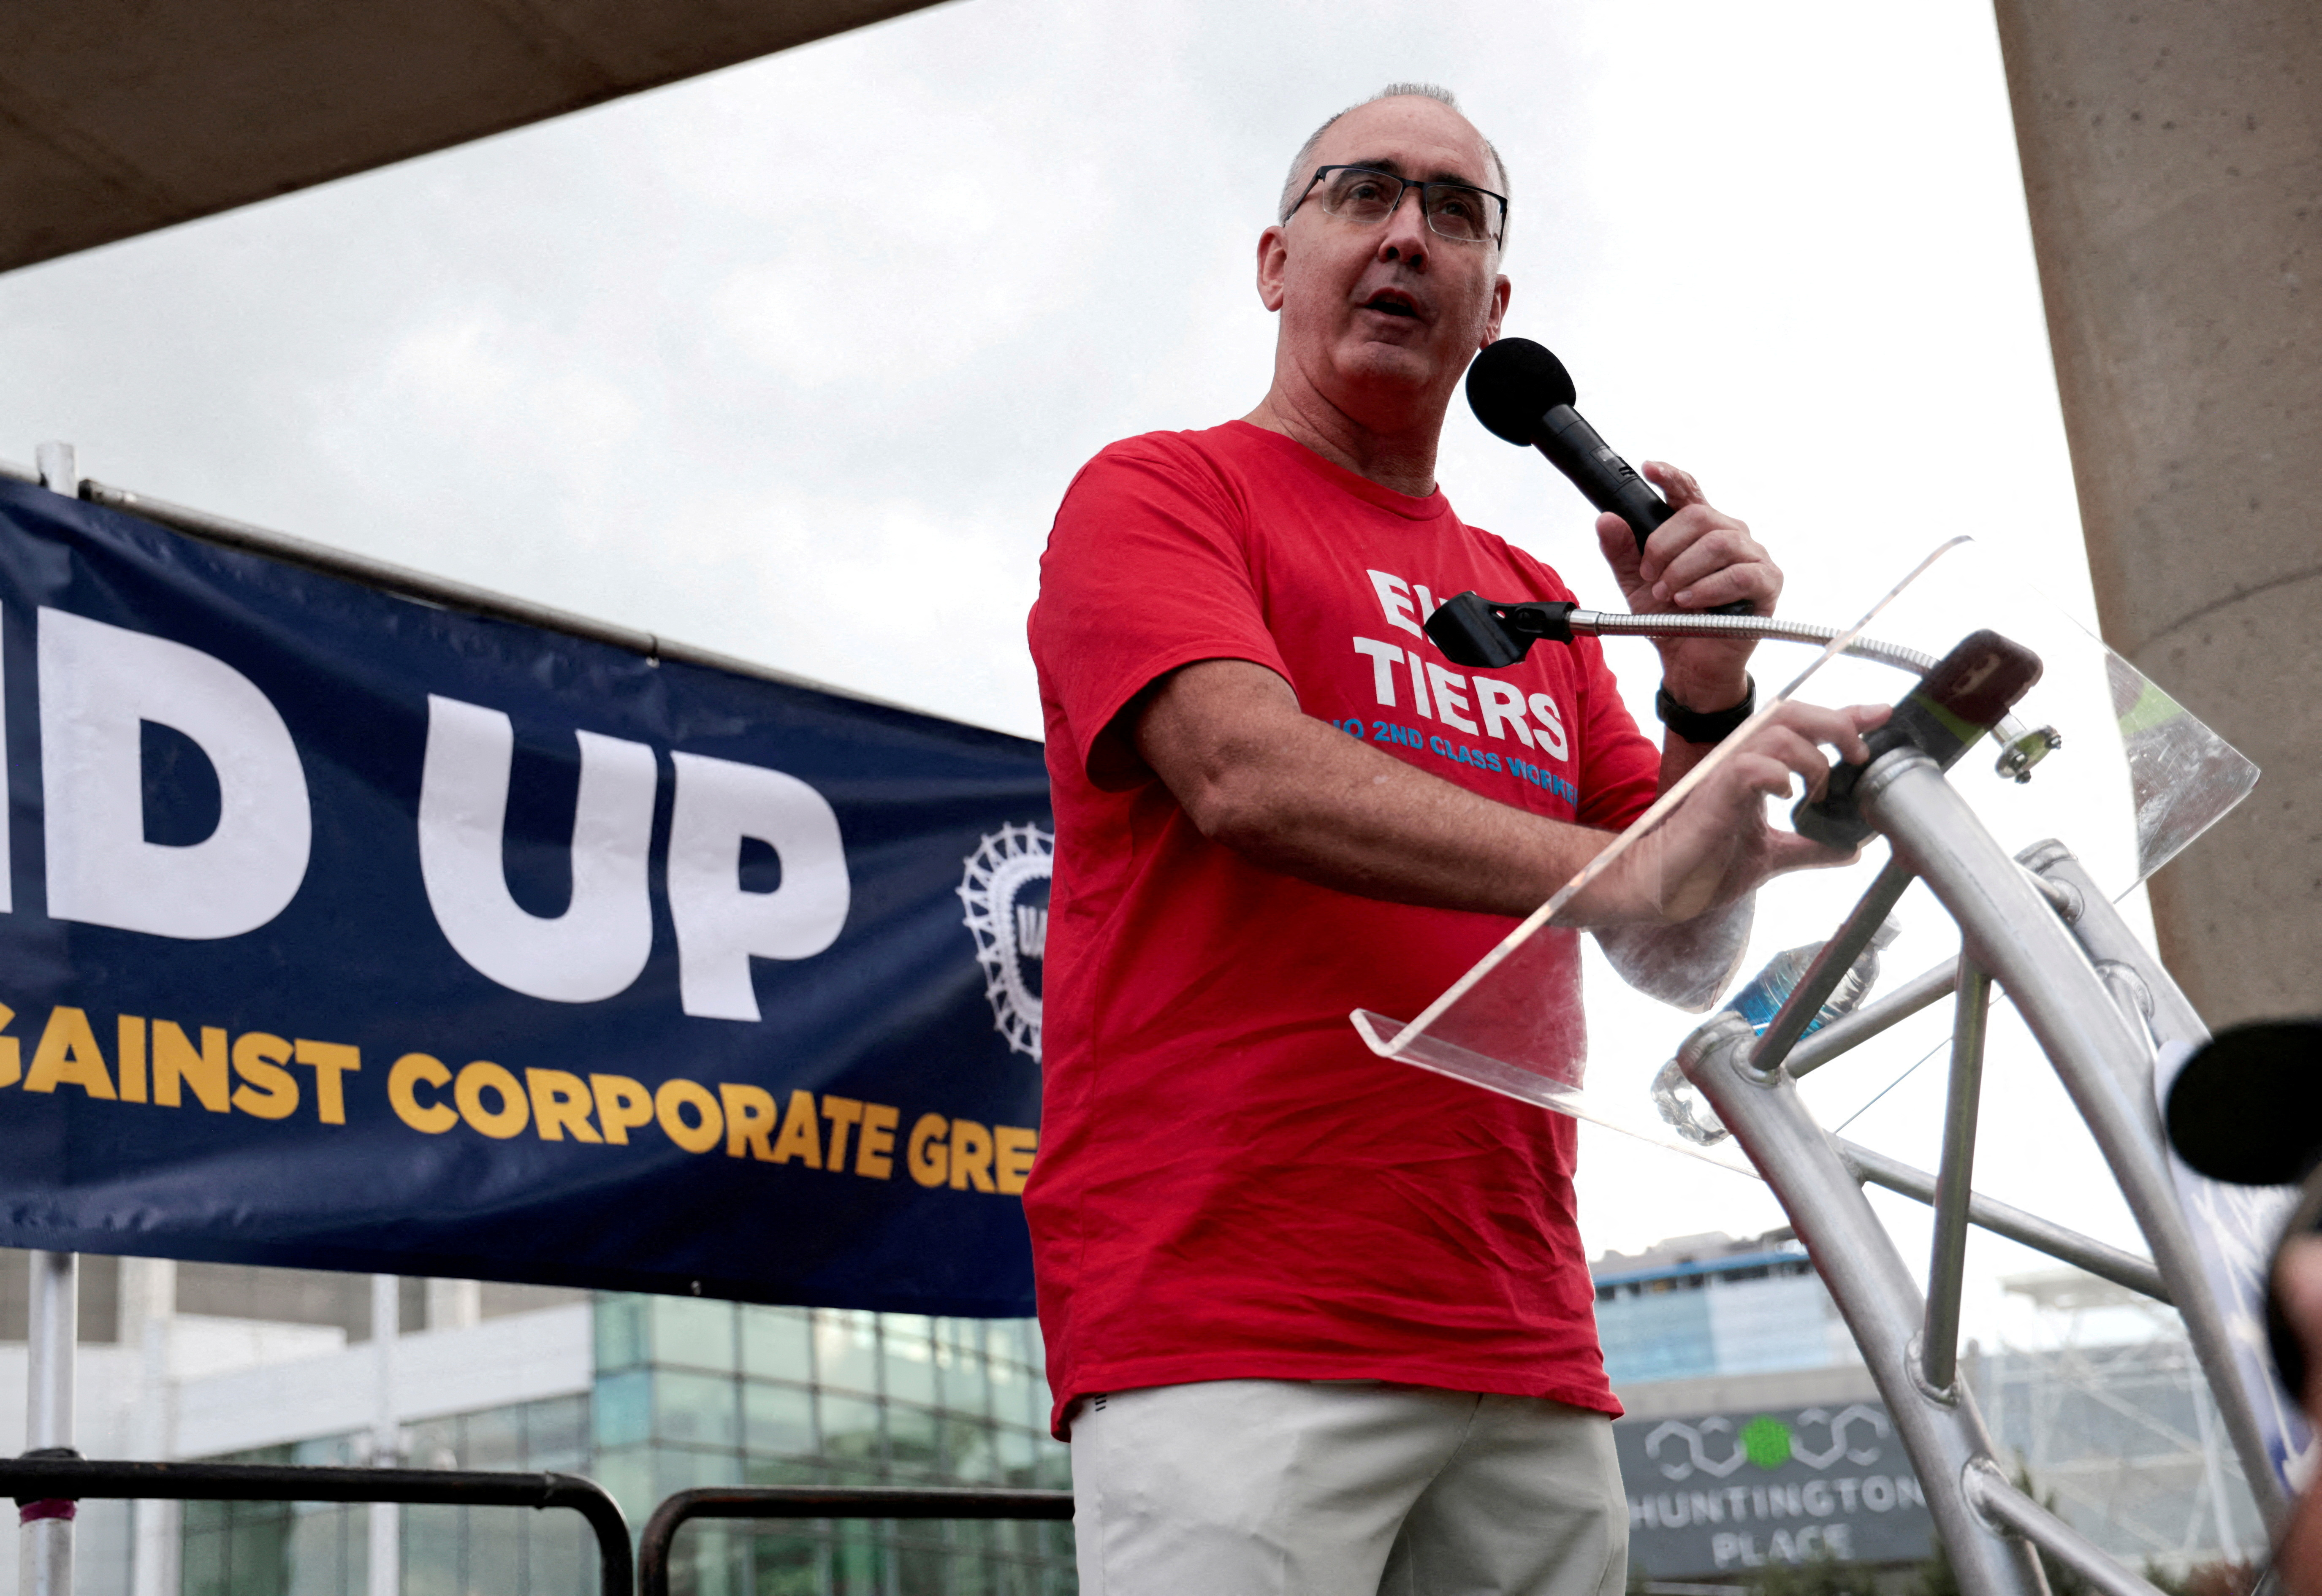 United Auto Workers President Shawn Fain addresses the audience during a rally in support of striking UAW